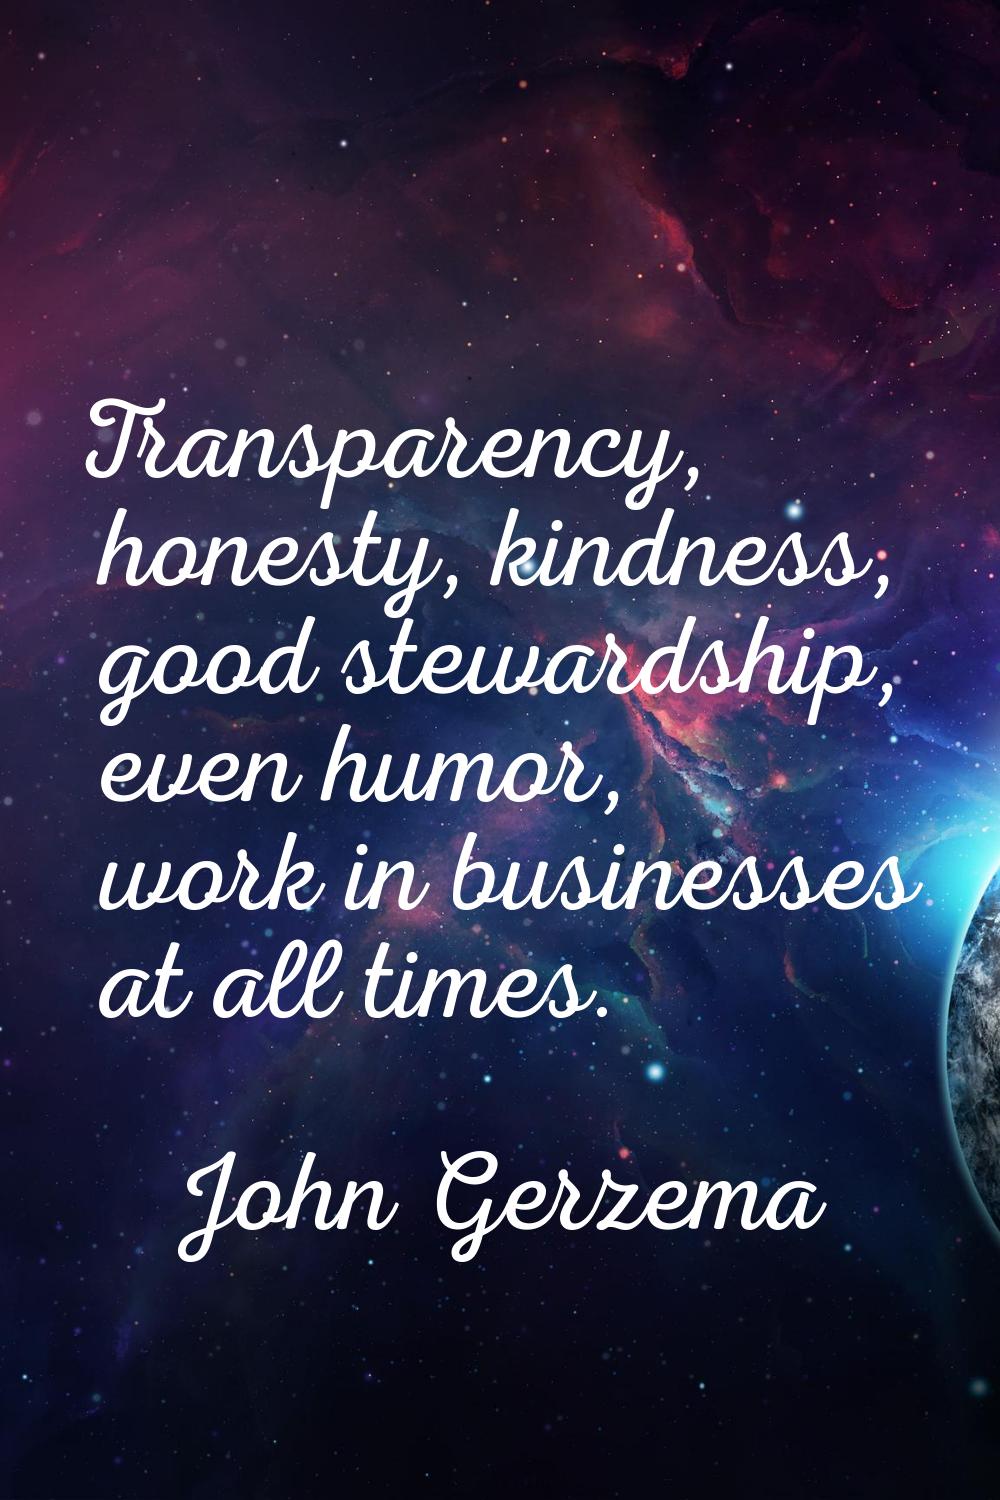 Transparency, honesty, kindness, good stewardship, even humor, work in businesses at all times.